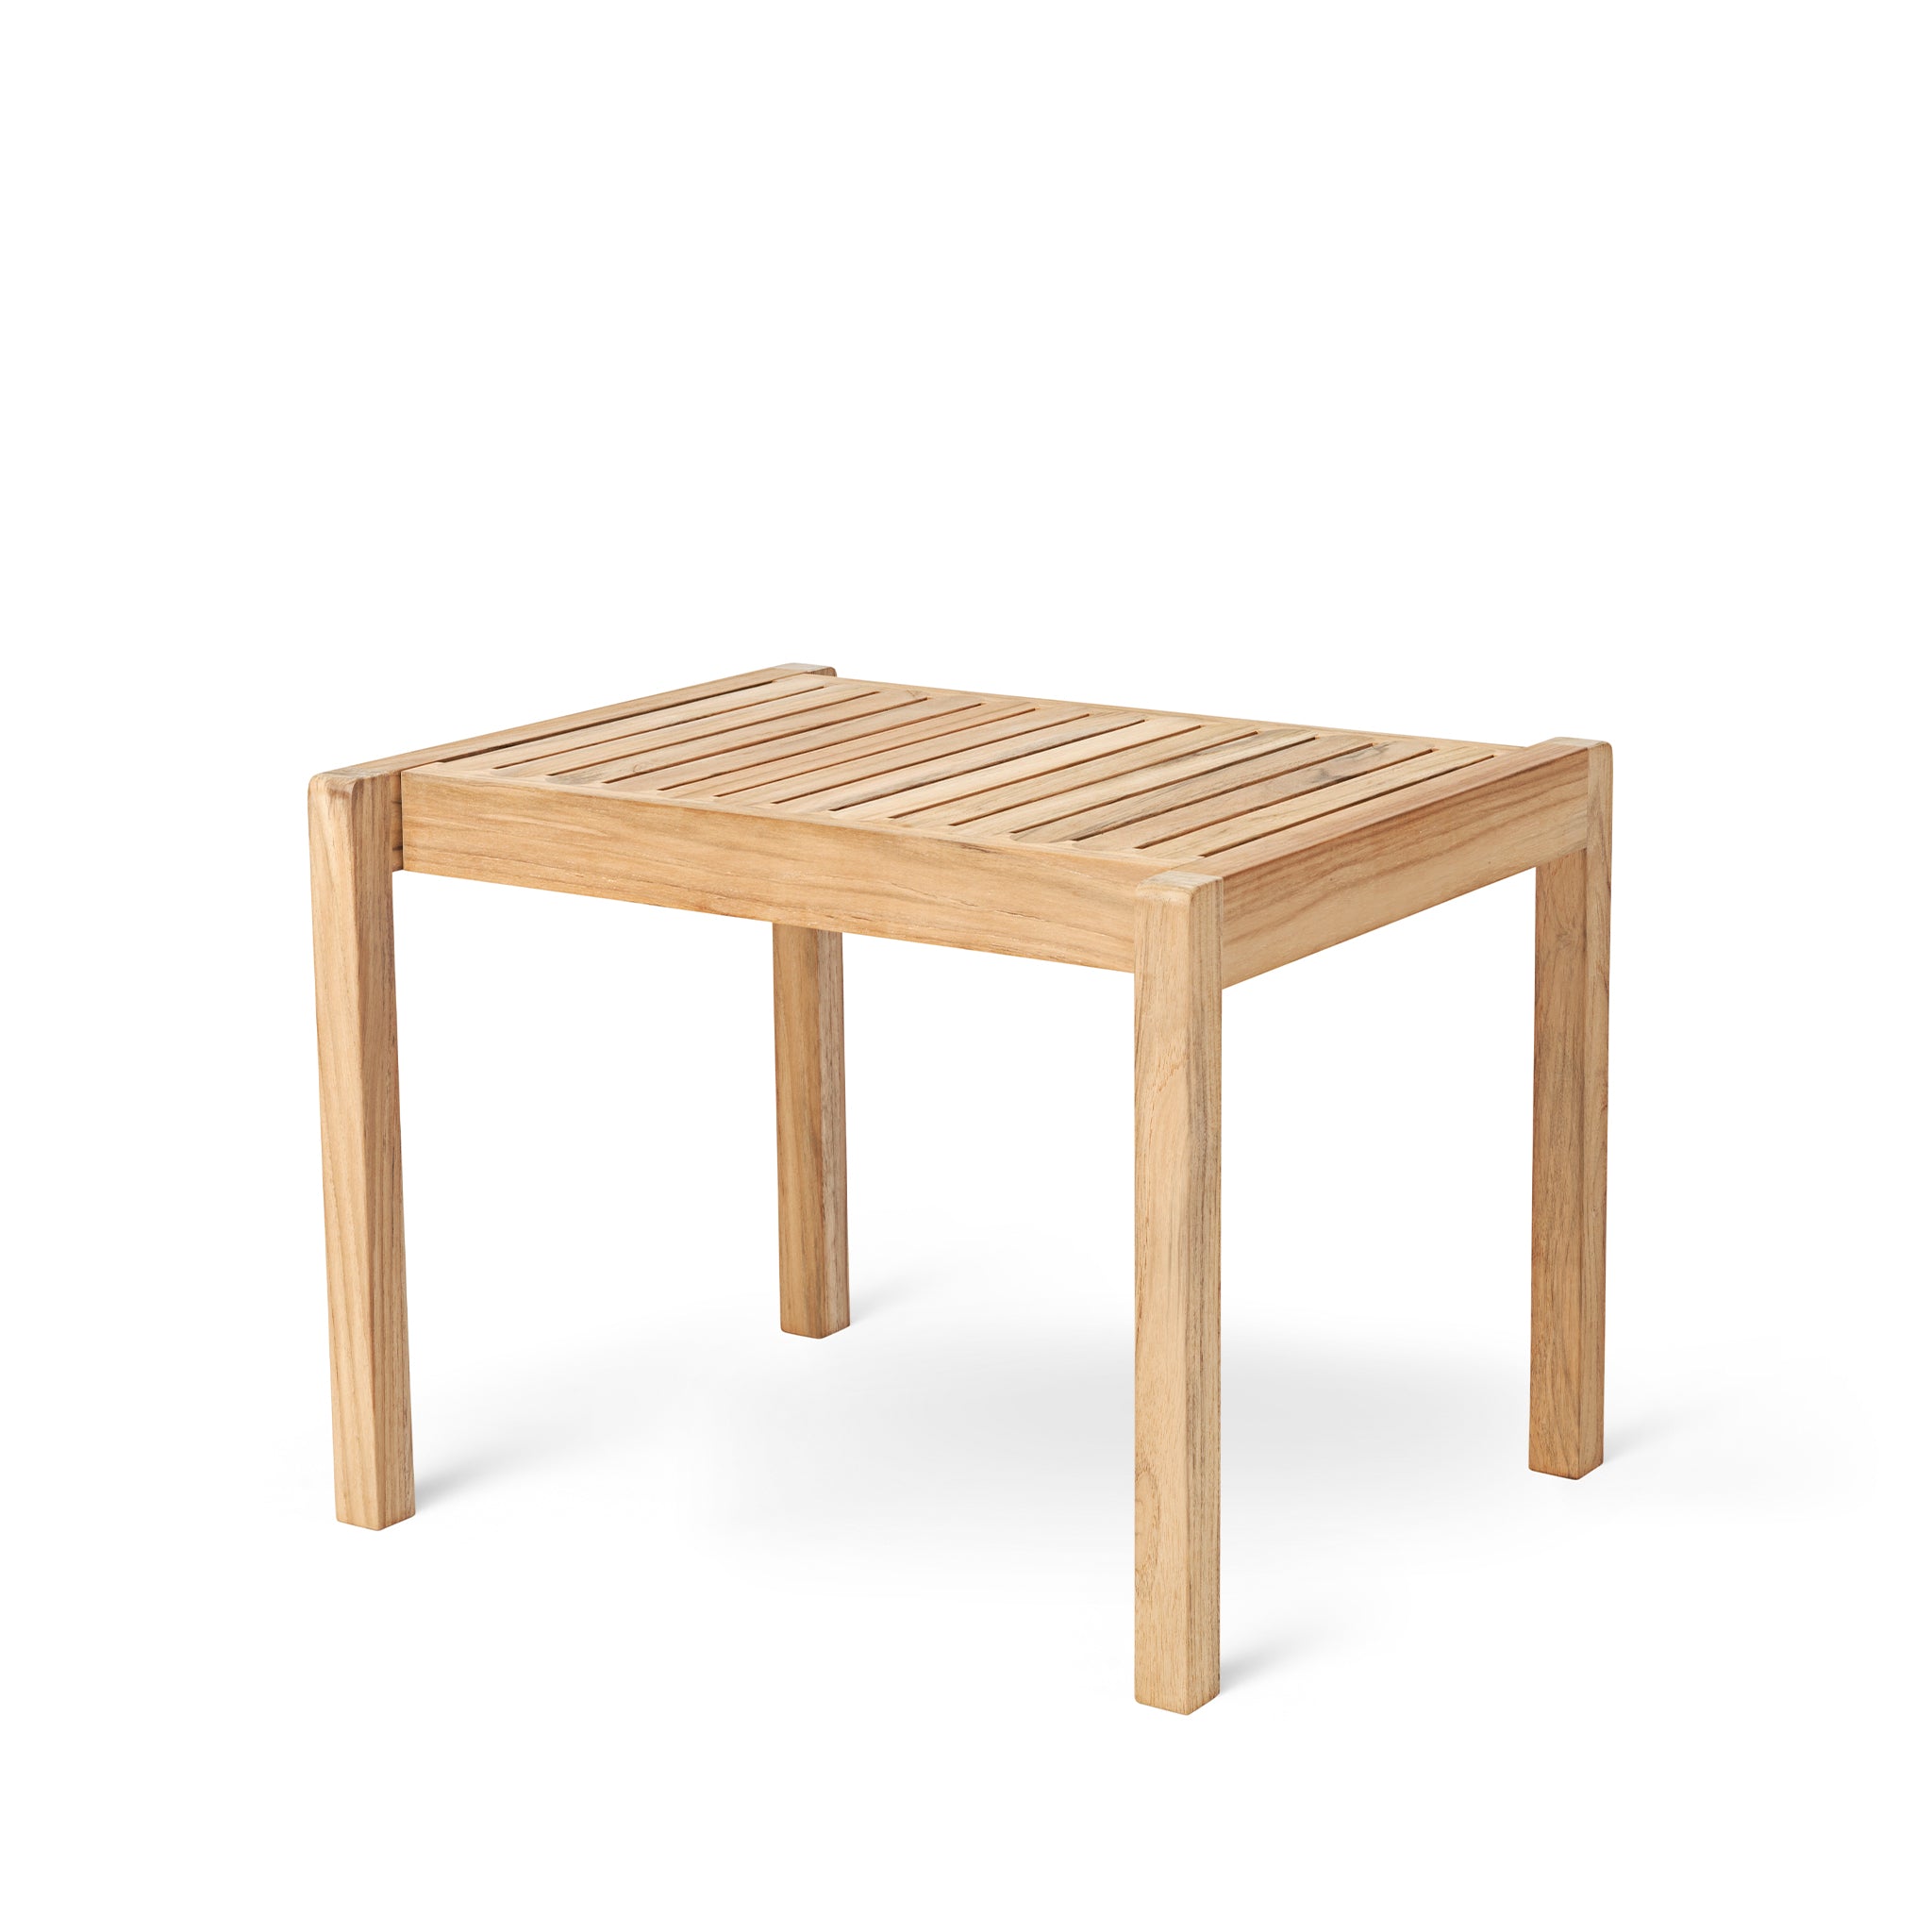 AH911 Side table / Stool by Alfred Homann